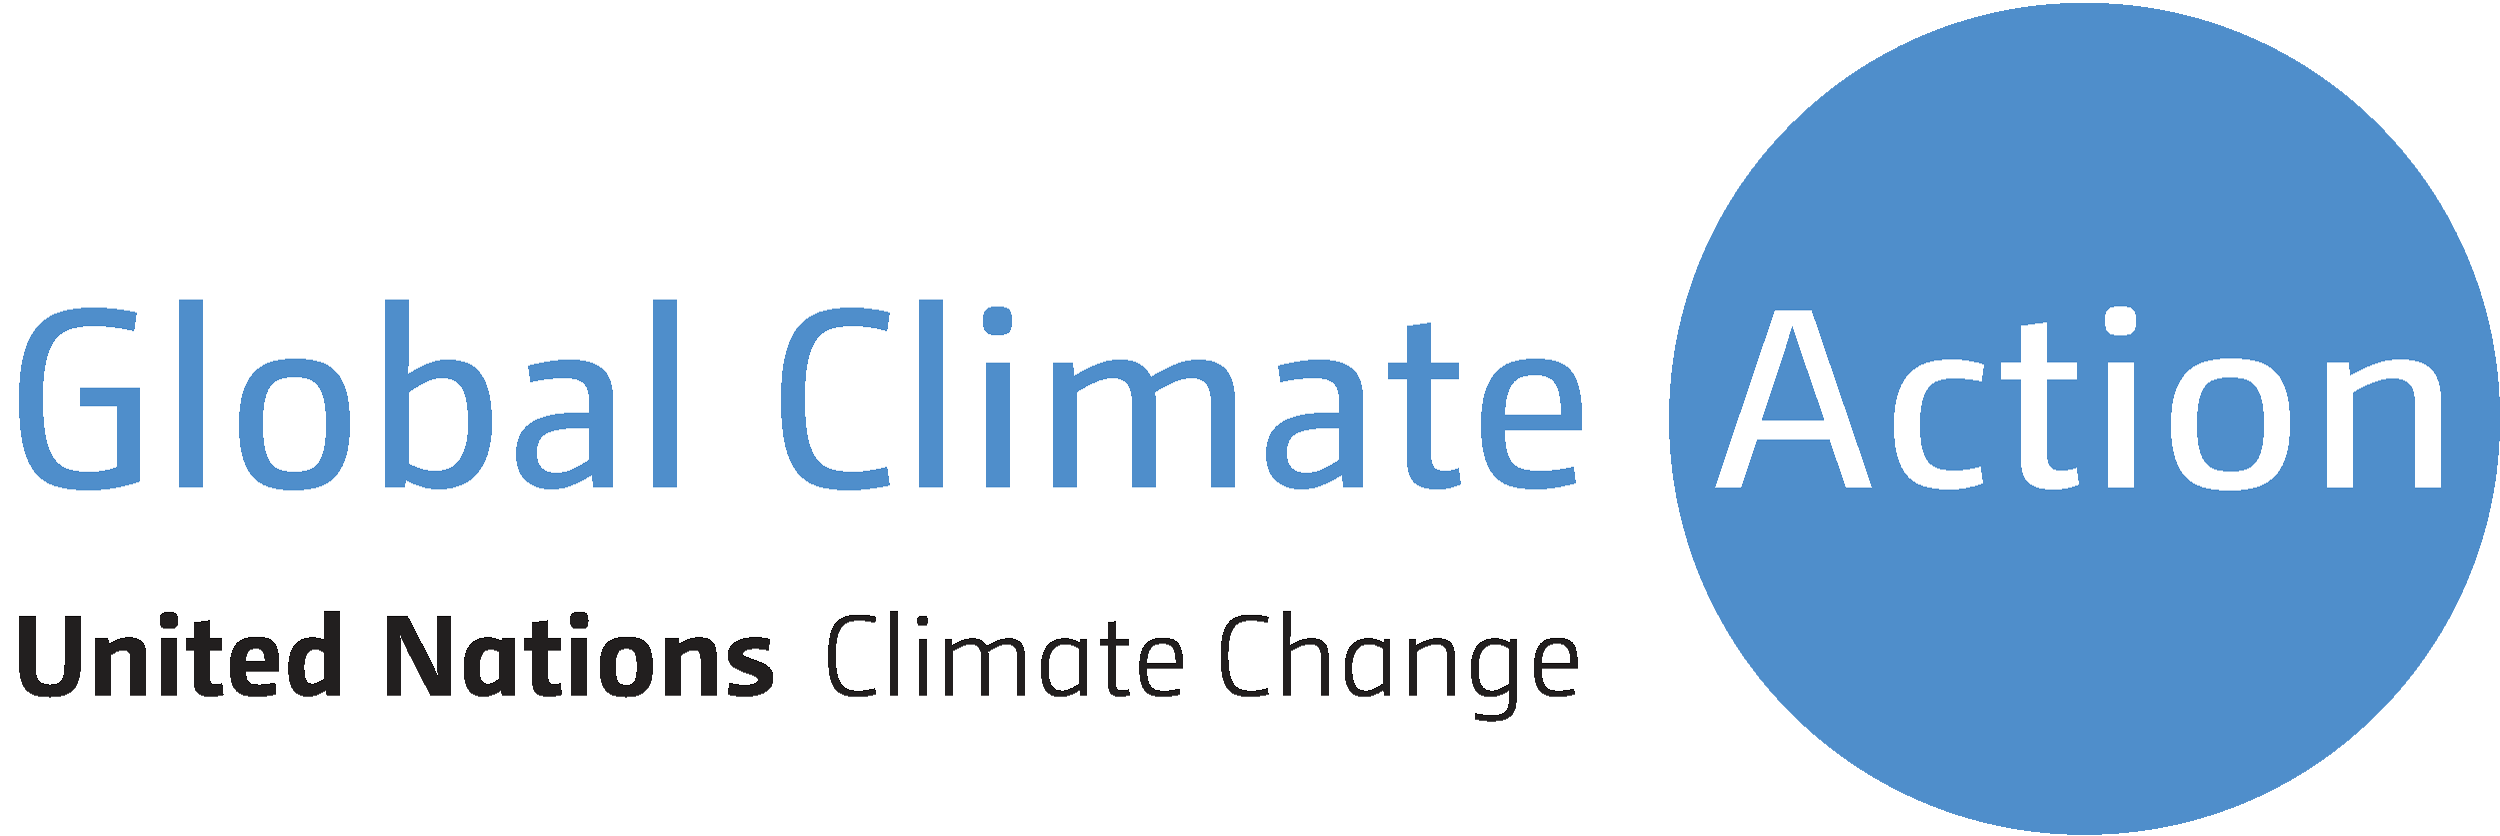 United nations climate changes